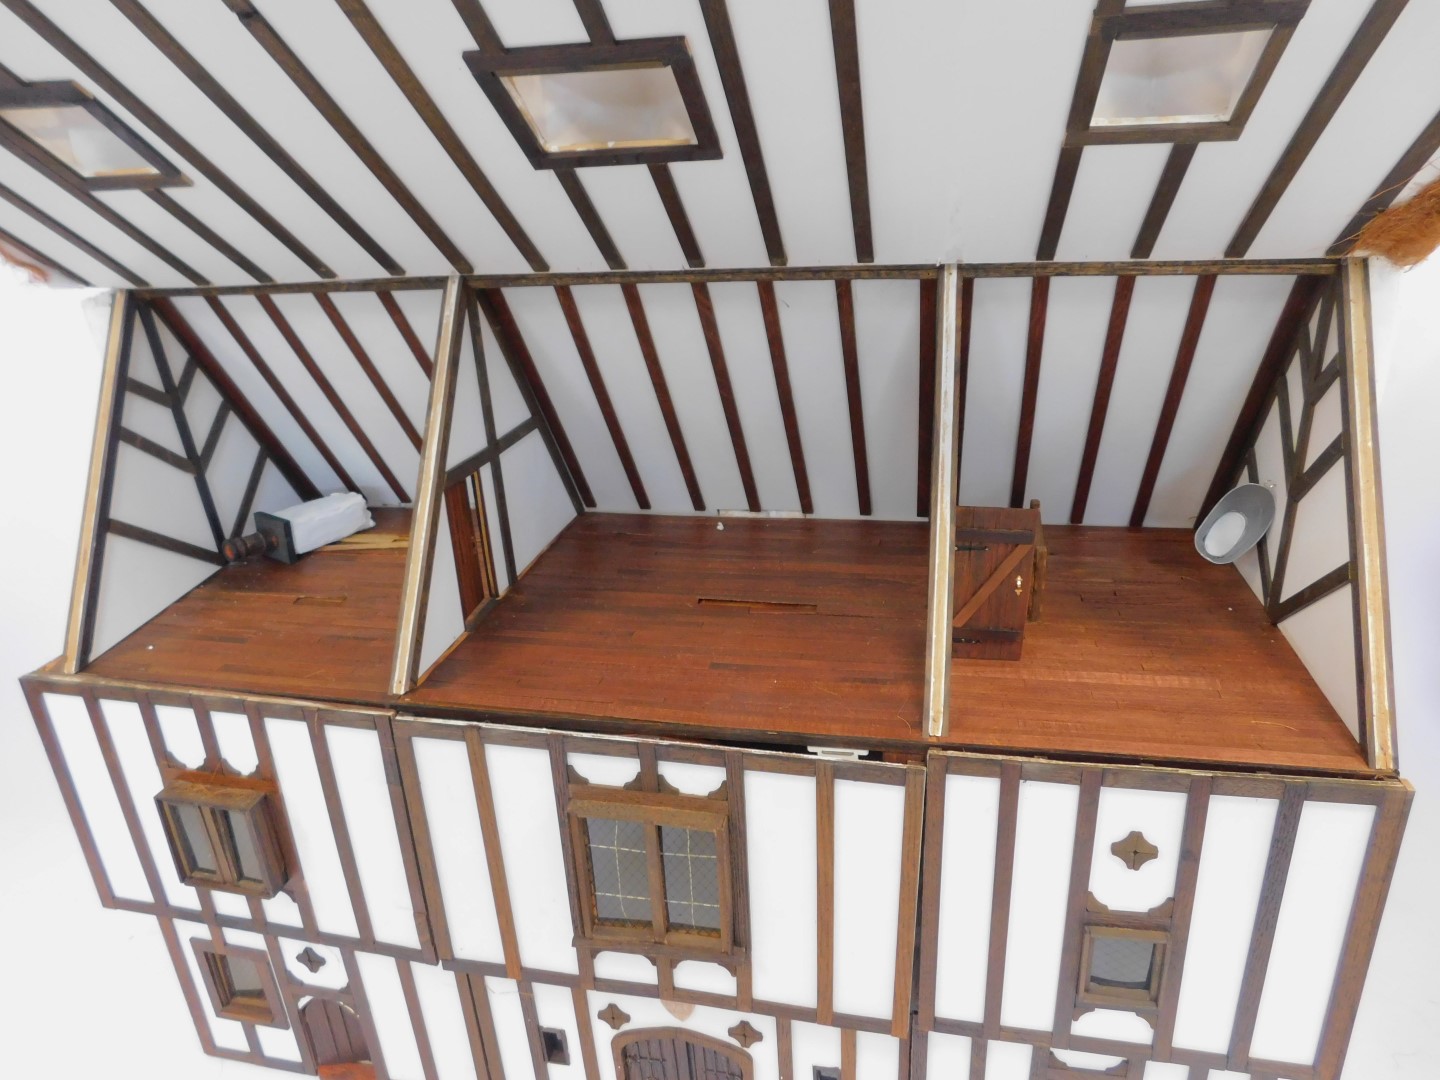 A three storey substantial Tudor style doll's house, with three chimneys, thatched roof, in painted - Image 2 of 10